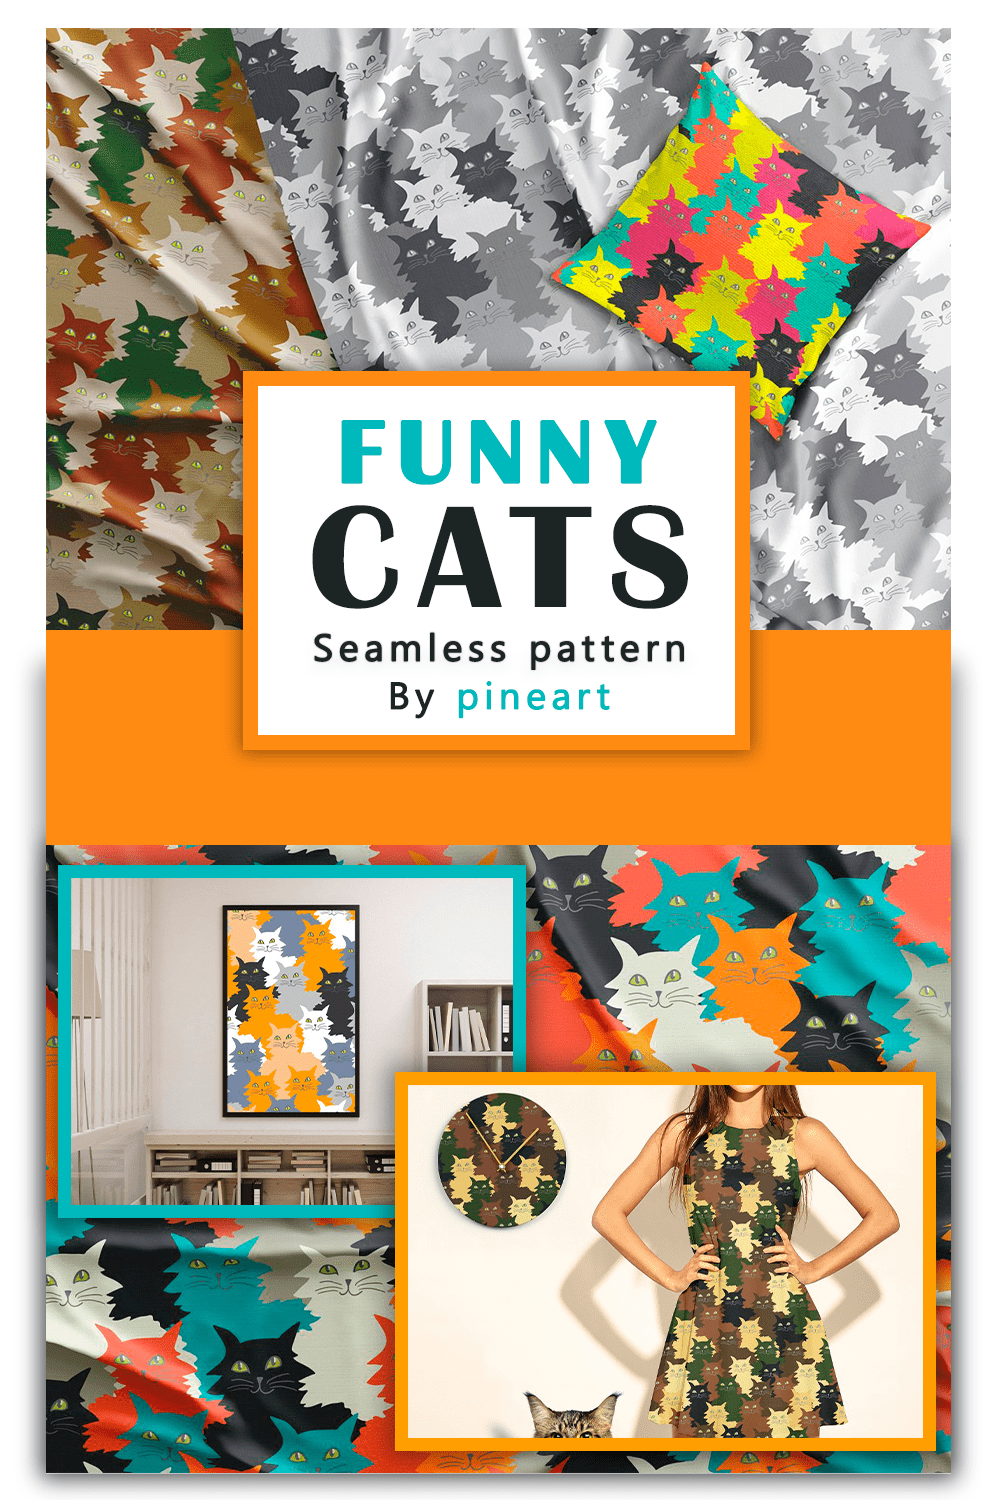 Funny cats illustration in different colors.